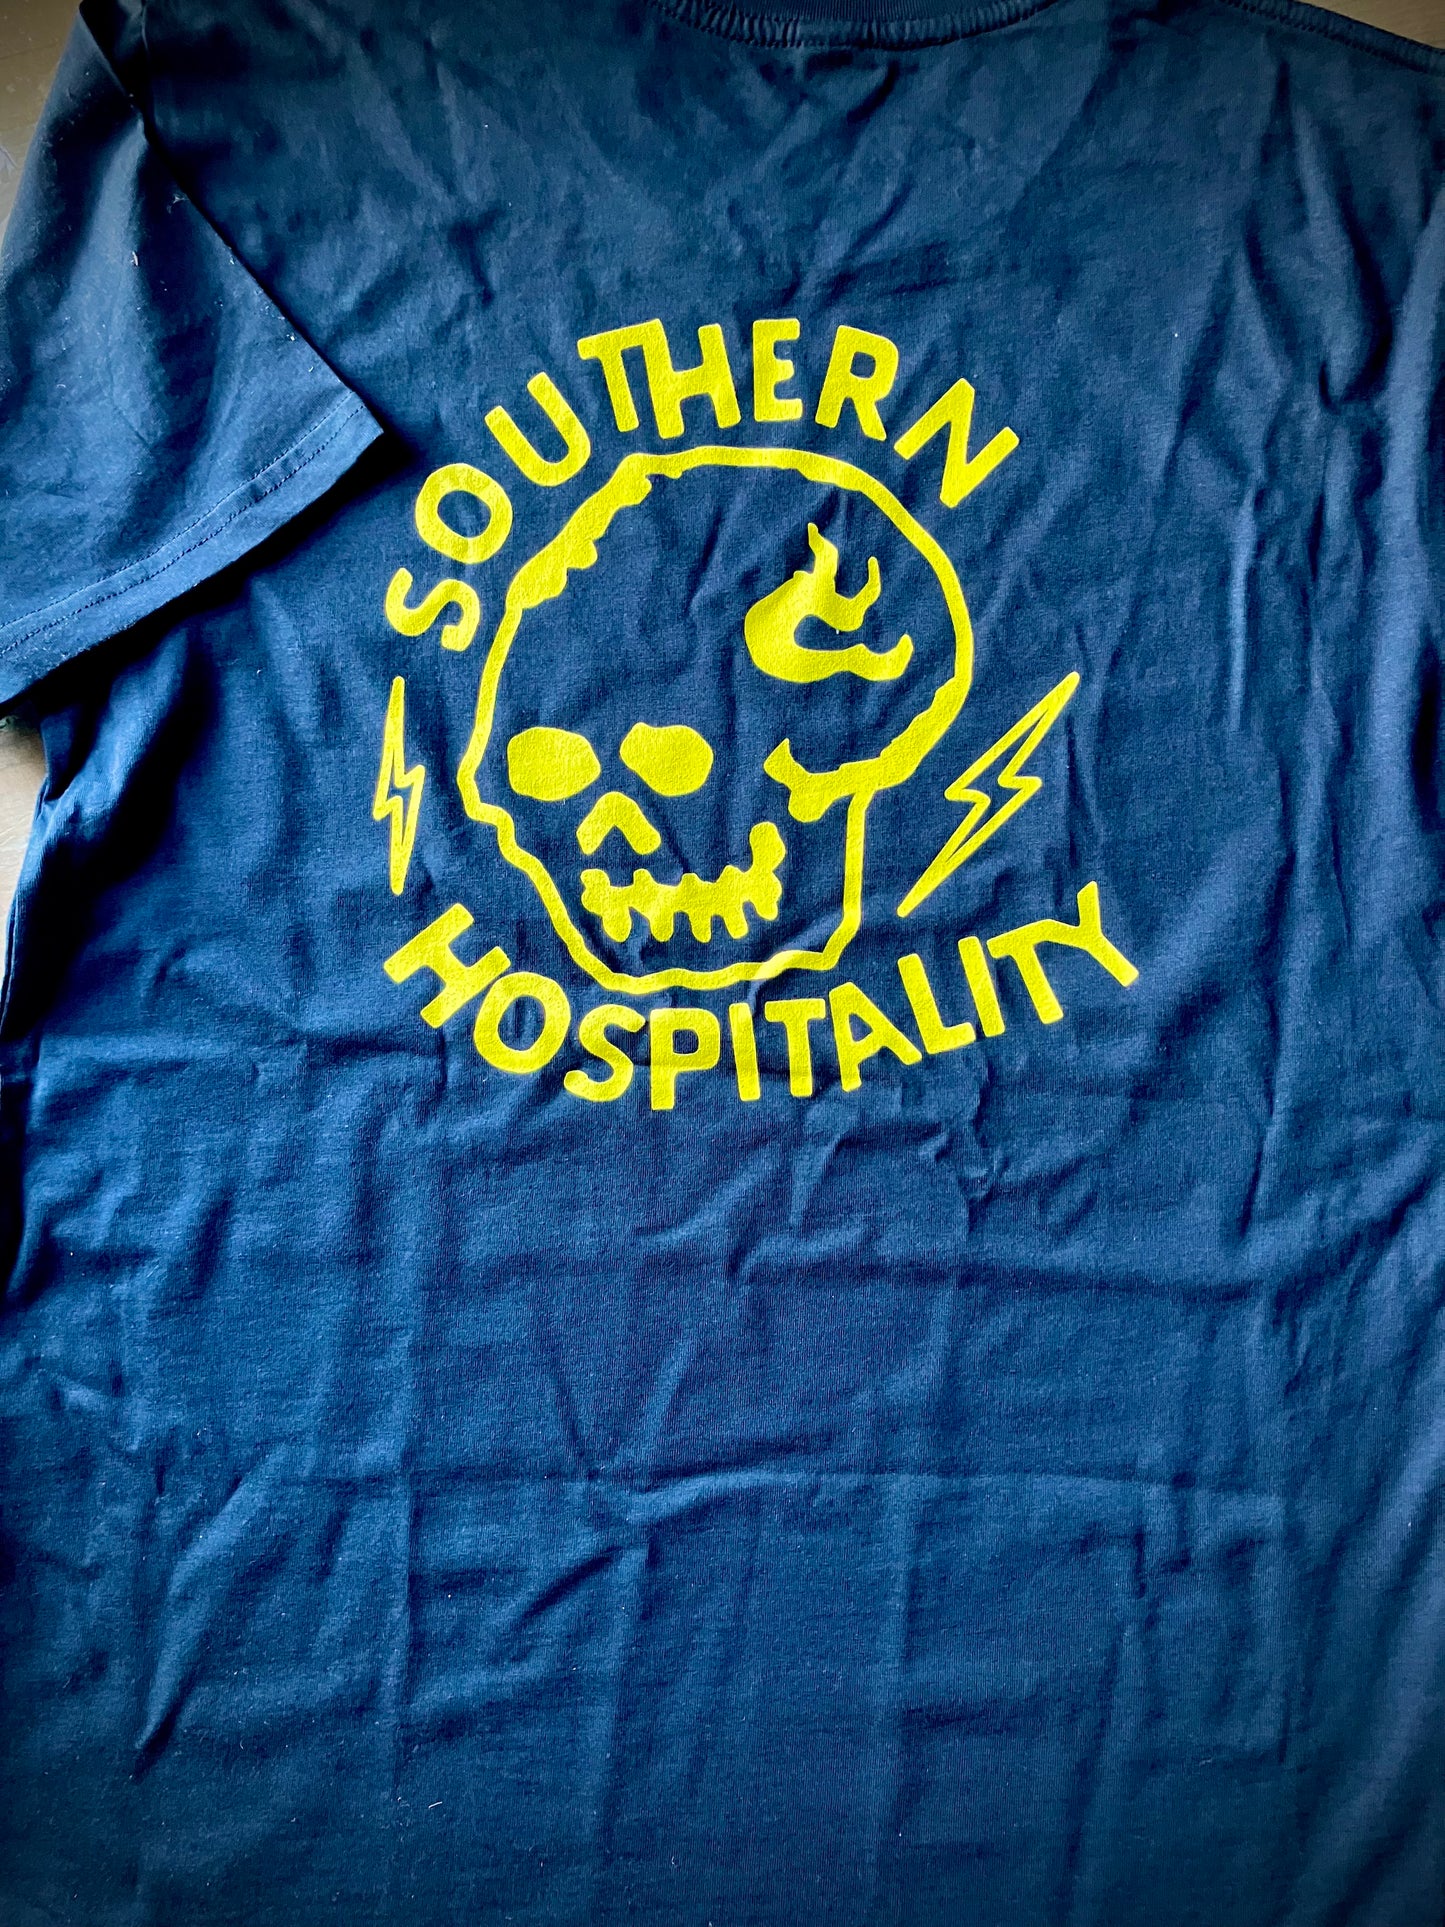 Local Southern Hospitality Soccer Men's Staple Tee